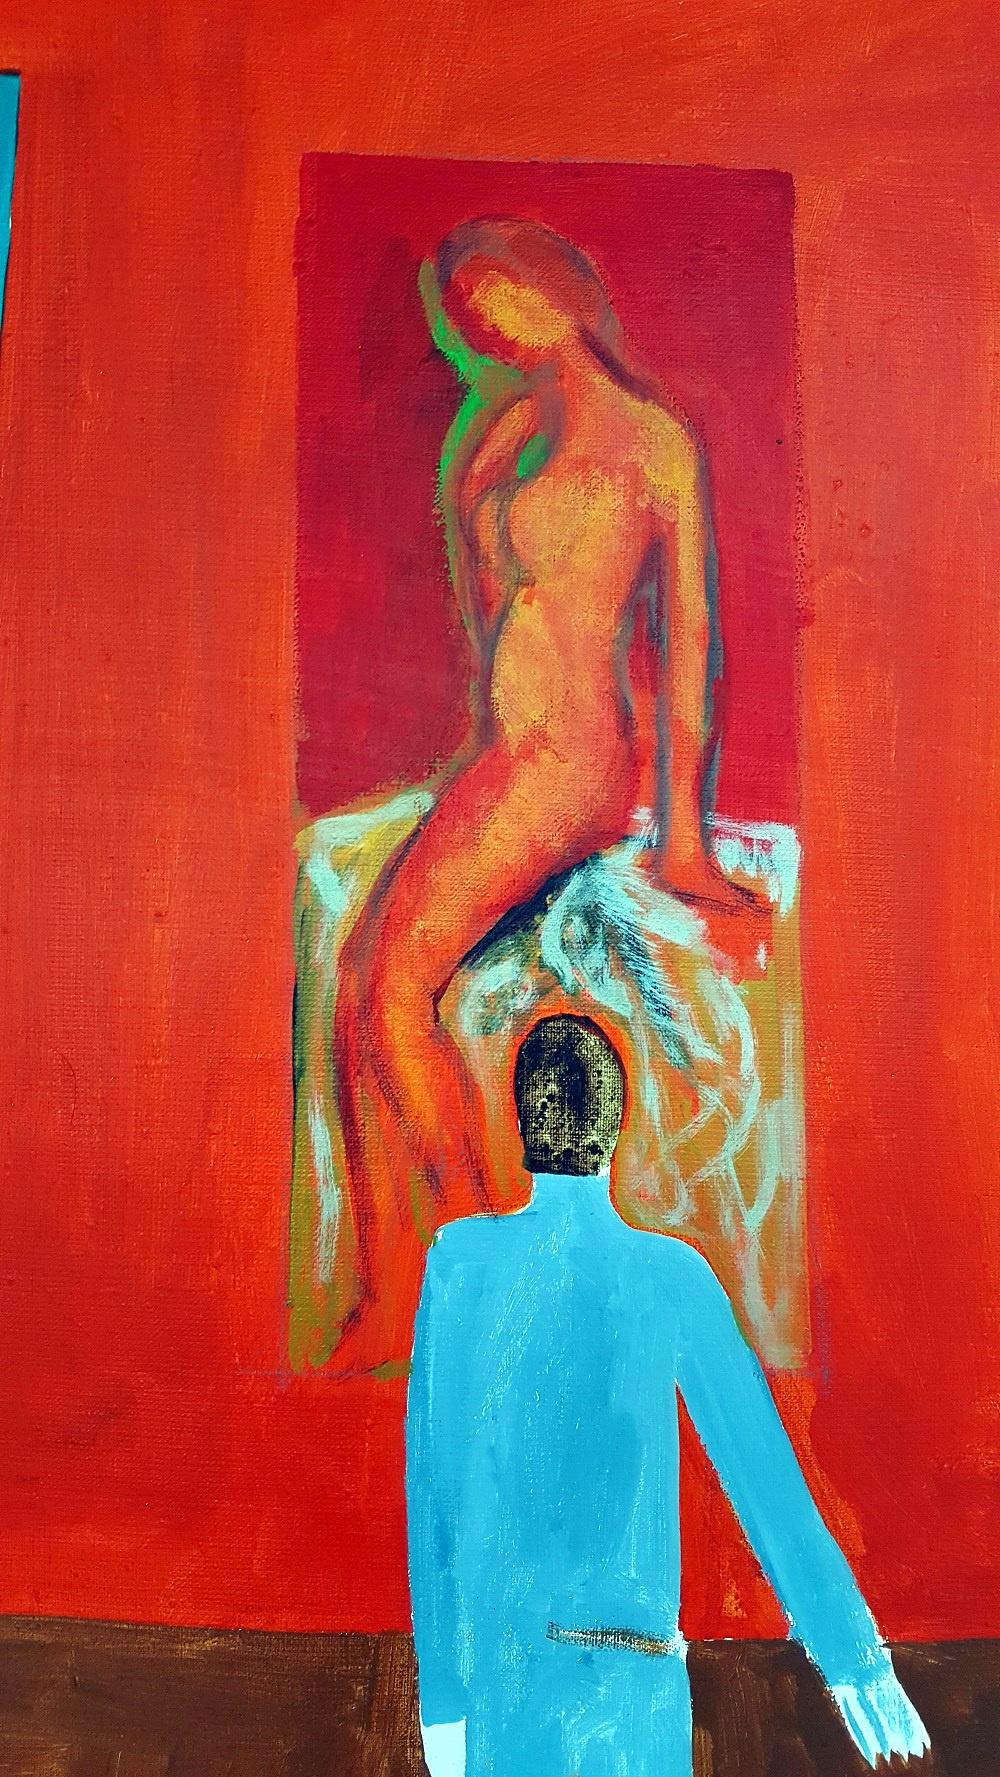 Gallery I - XXI century, Oil figurative painting, Interior, Vibrant colors - Other Art Style Painting by Iszchan Nazarian